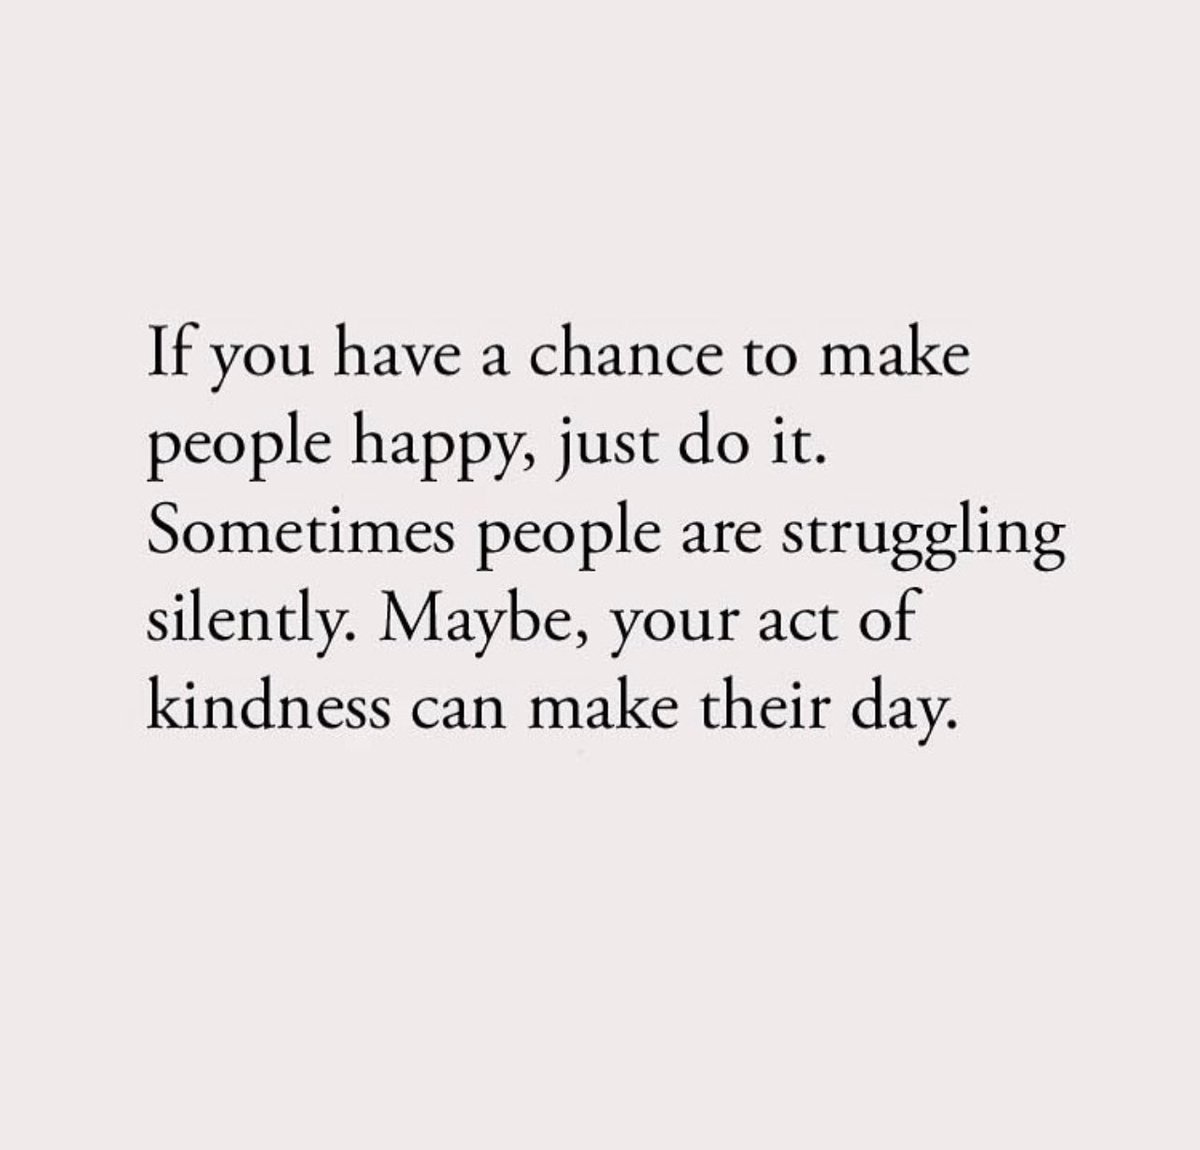 your act of kindness can make their day.